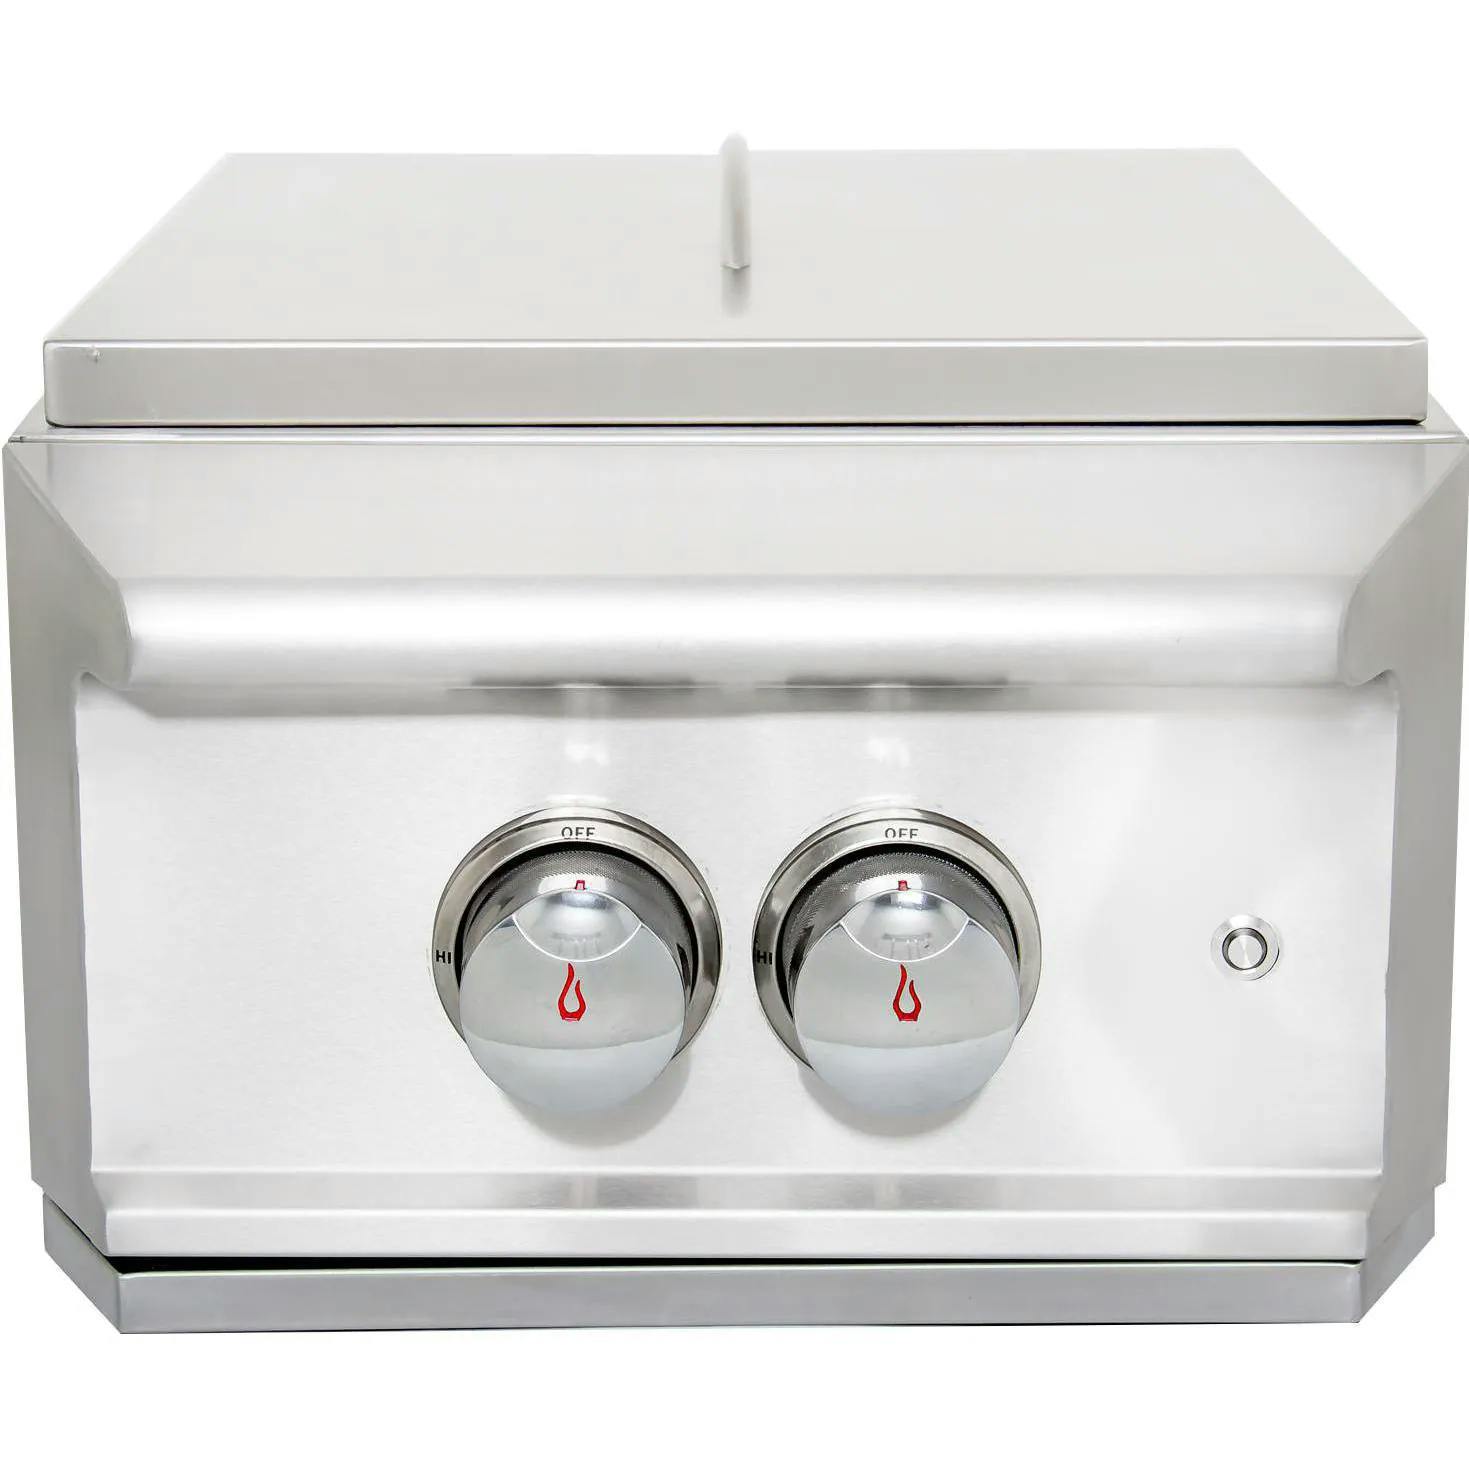 Blaze Professional LUX Built-In High Performance Power Burner with Wok Ring and Stainless Steel Lid · Natural Gas